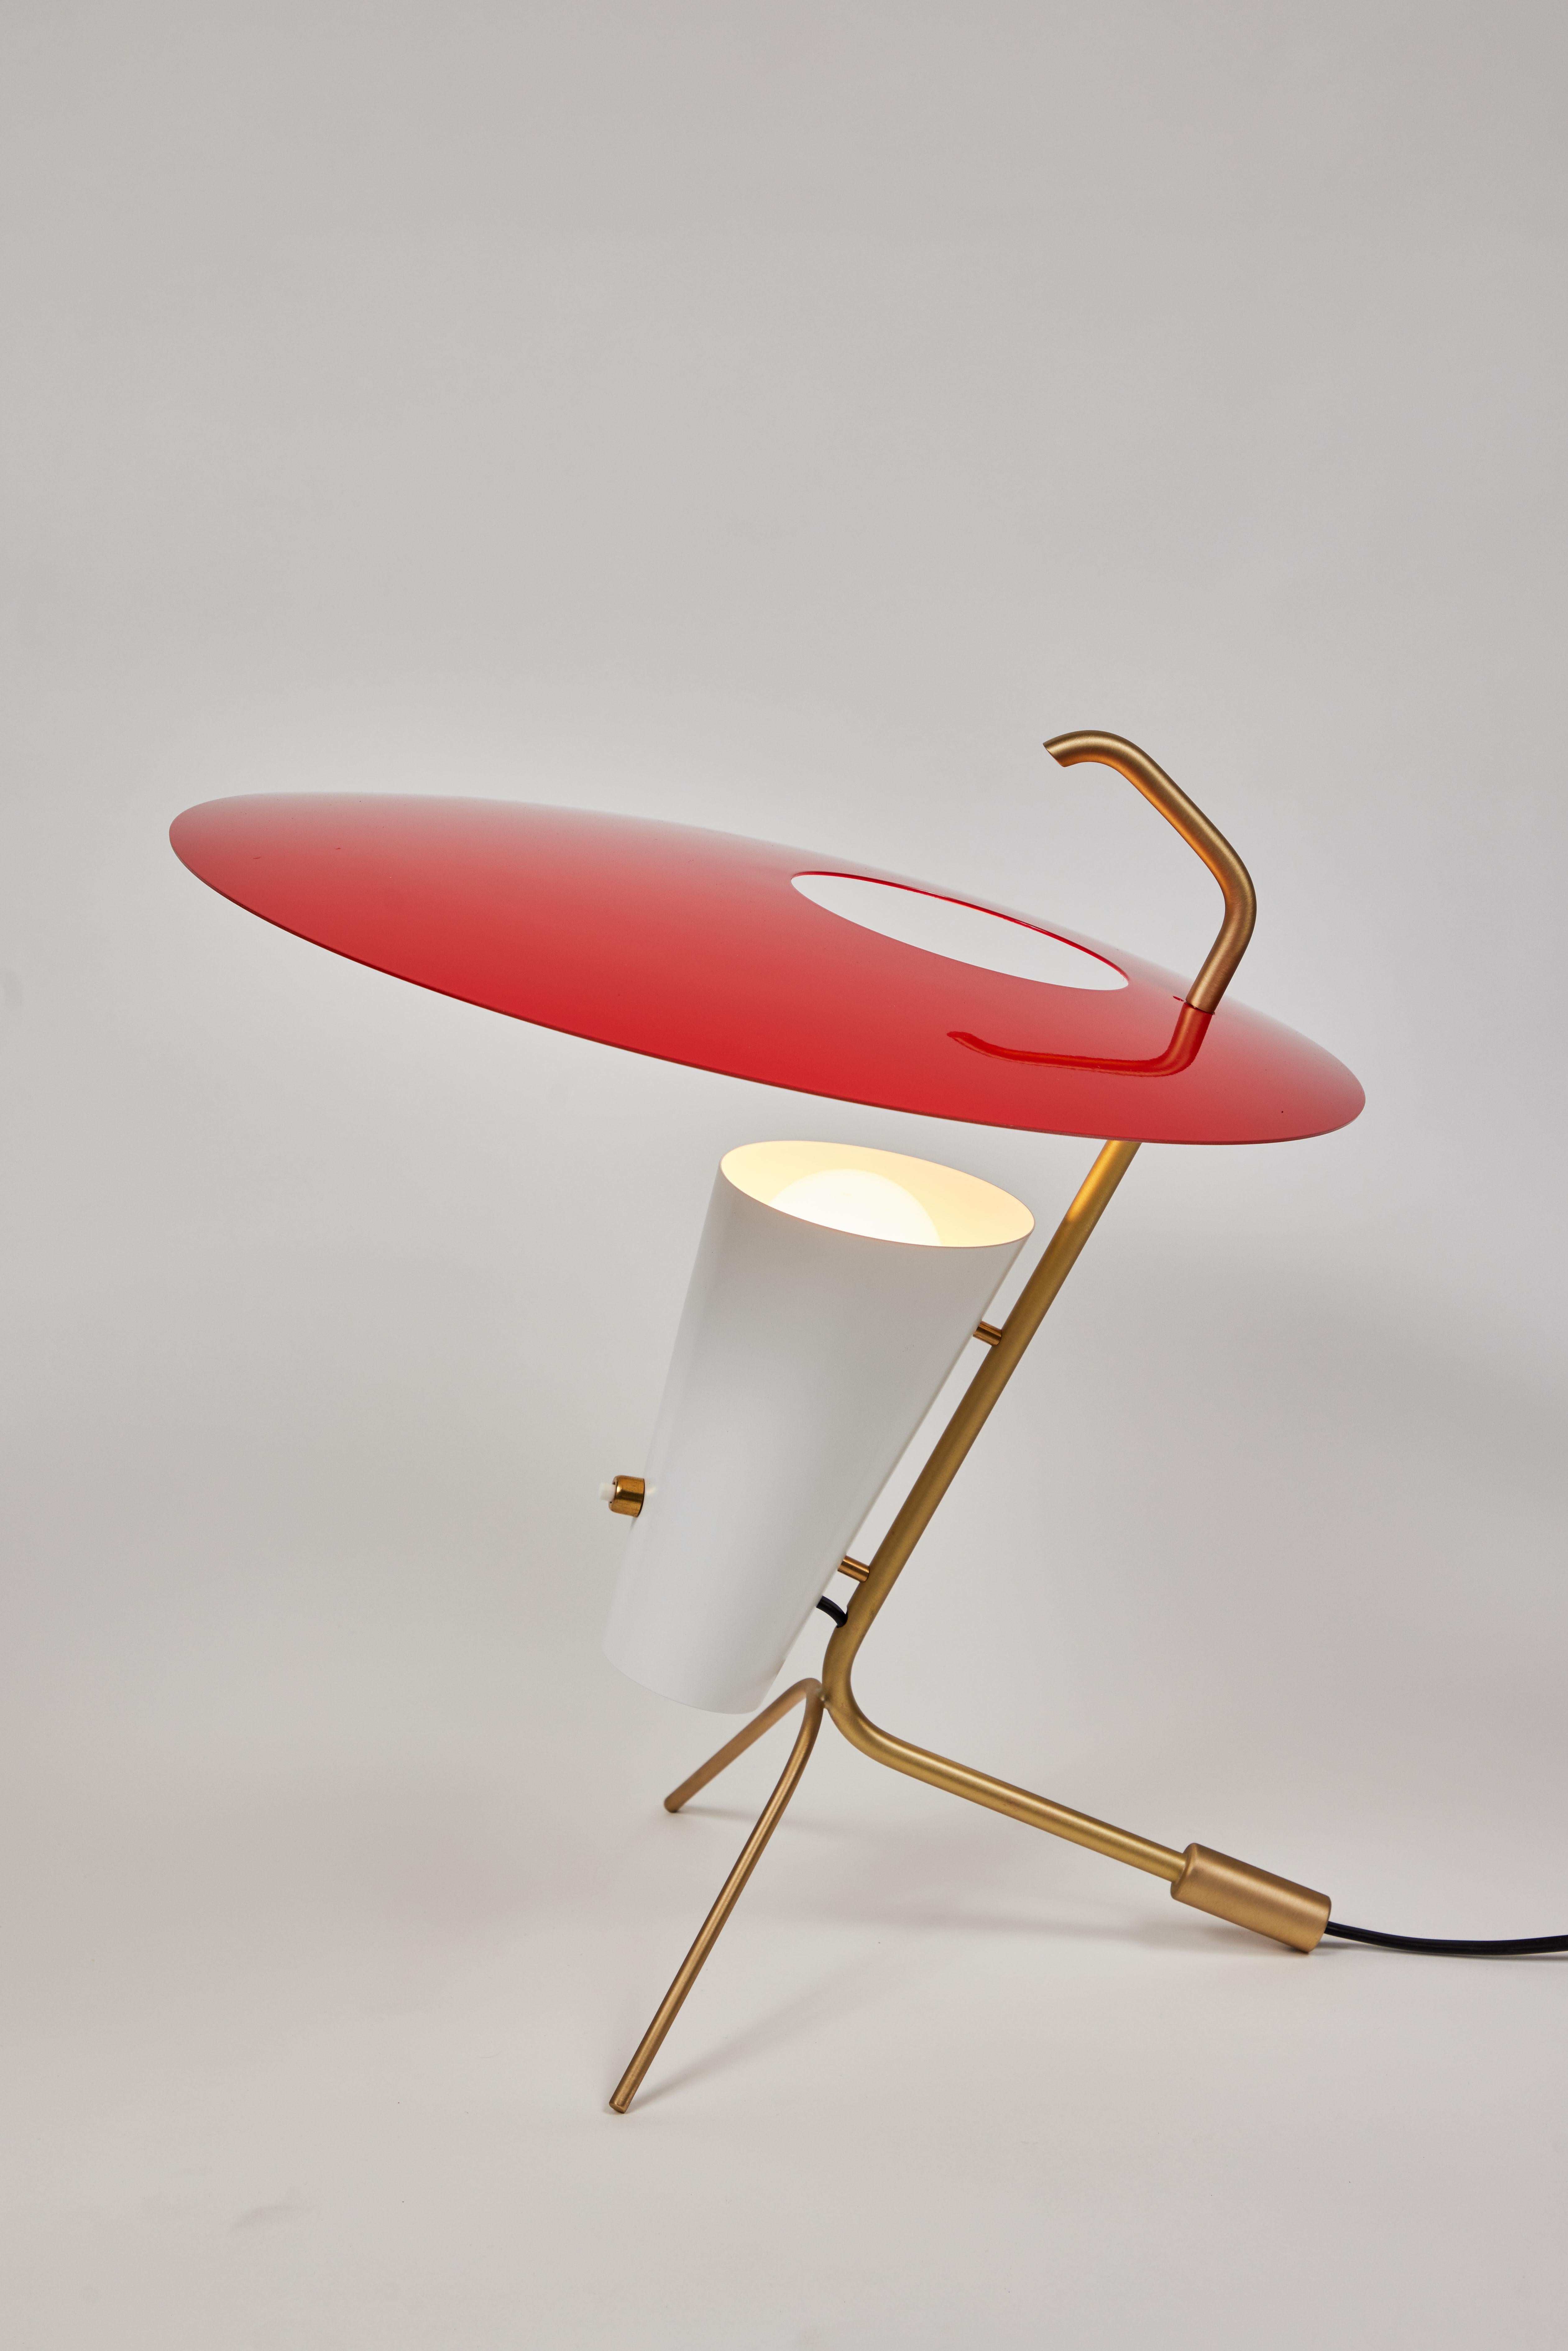 Contemporary Pierre Guariche G24 Table Lamp in Red and White for Sammode Studio For Sale